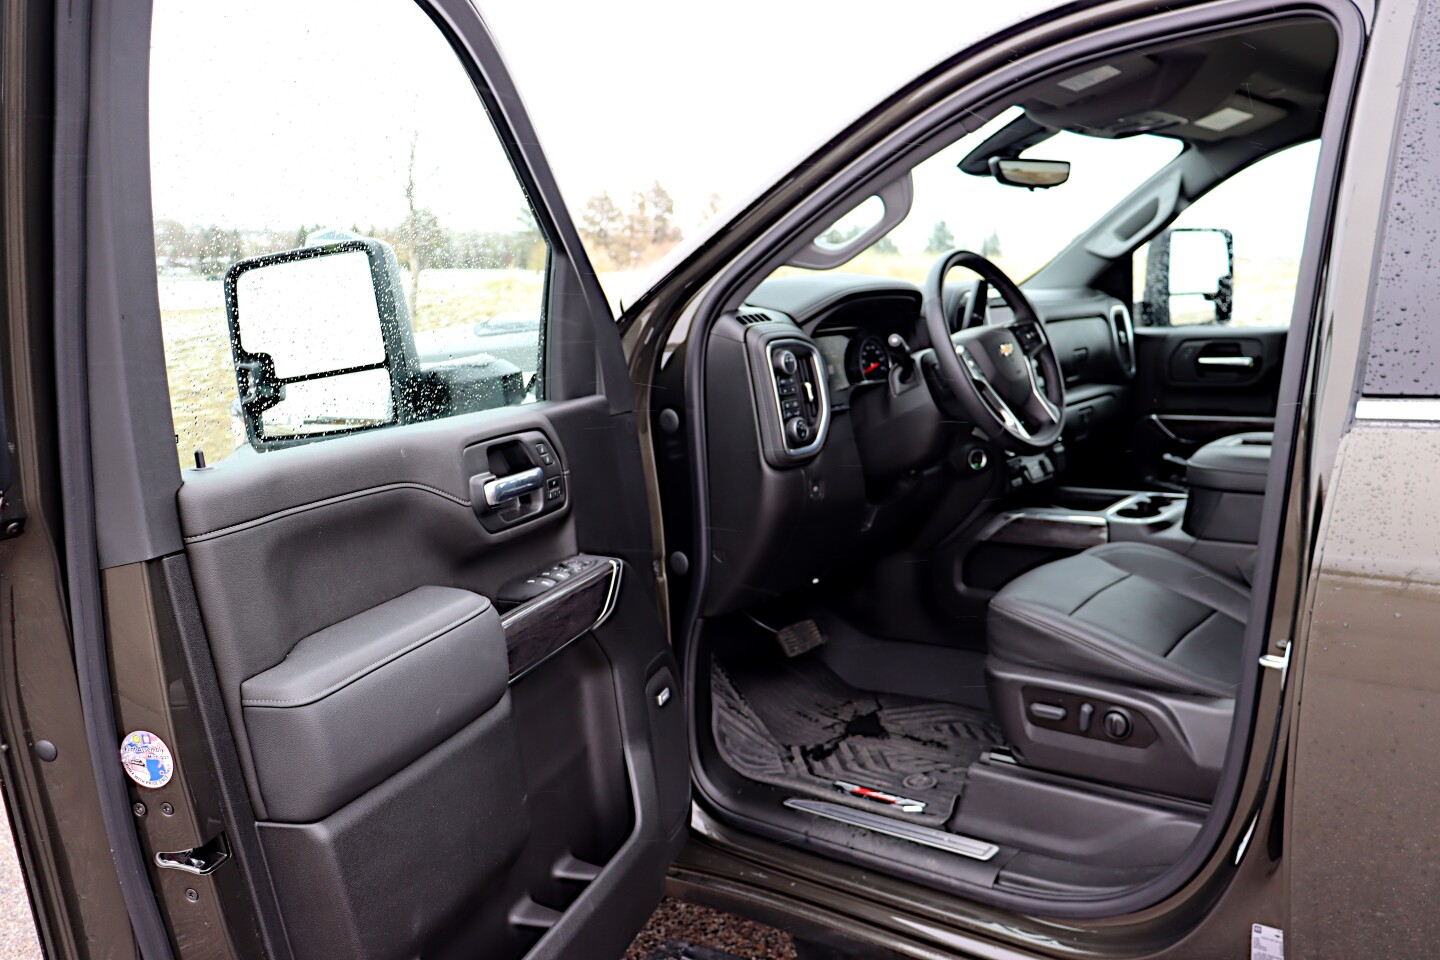 The 2022 Chevrolet Silverado 2500 HD has a well-appointed interior, though it is dated compared to rivals